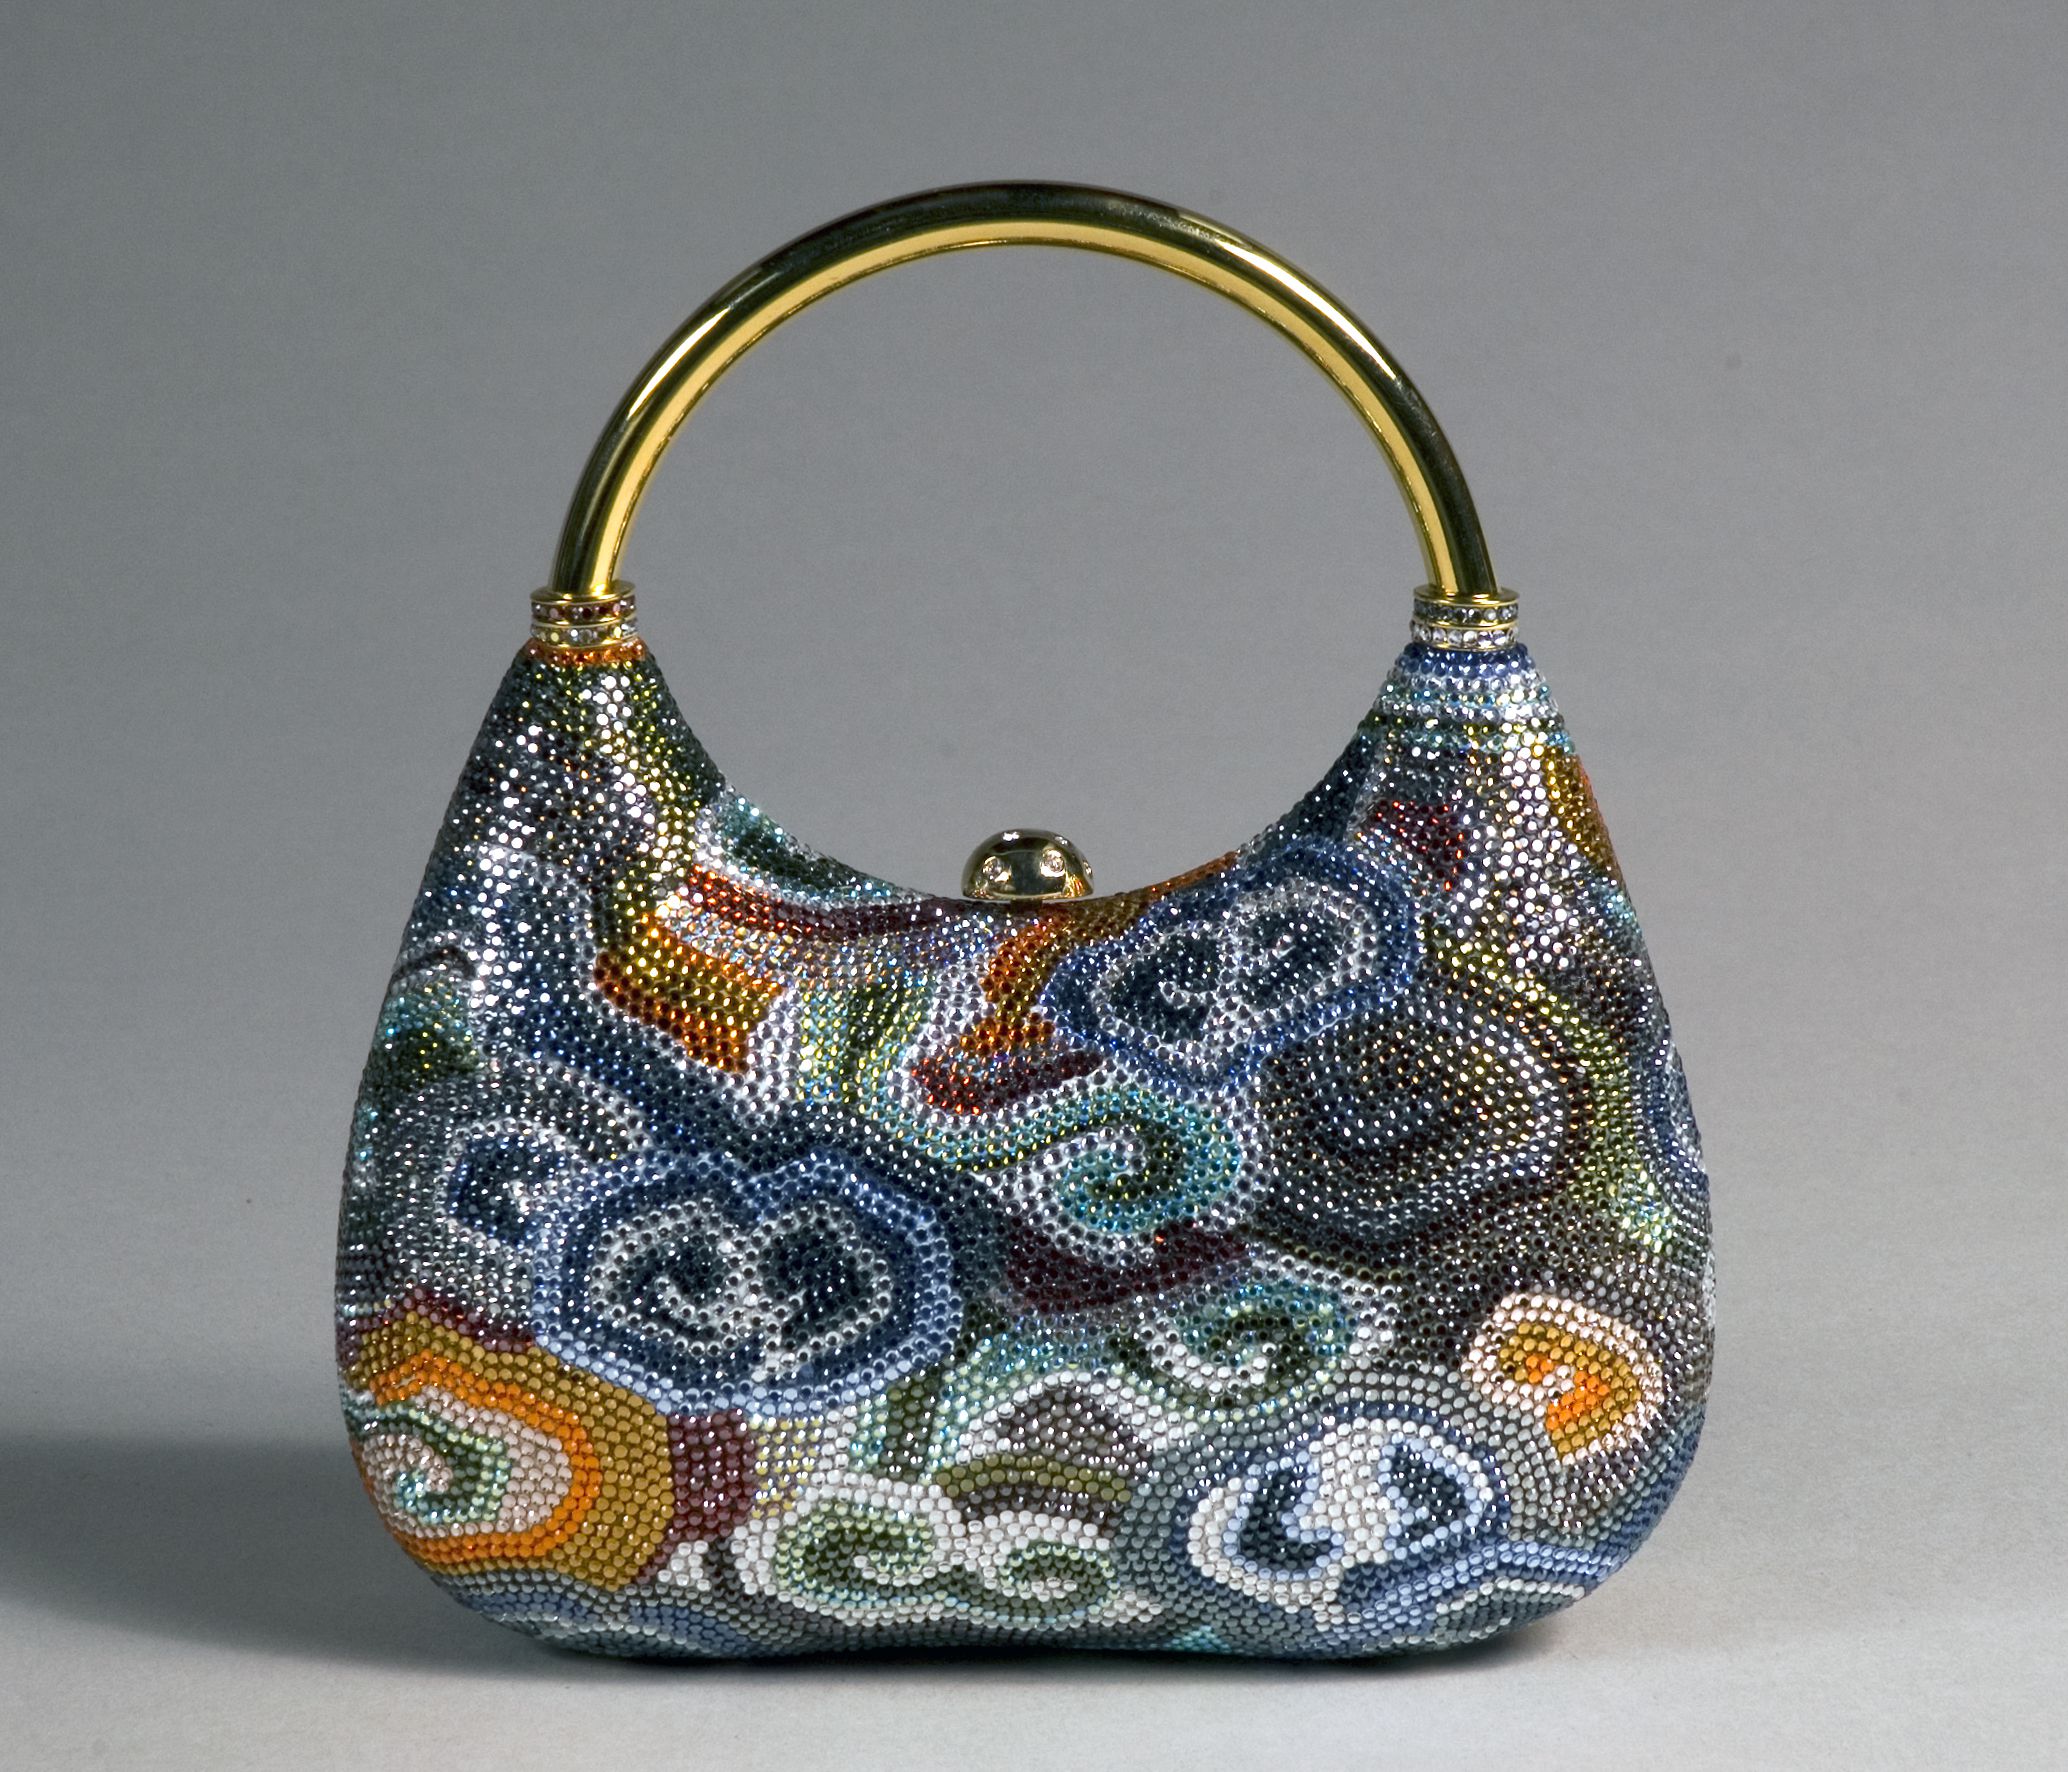 Judith Leiber handbags to be sold at Heritage Auctions Oct. 9